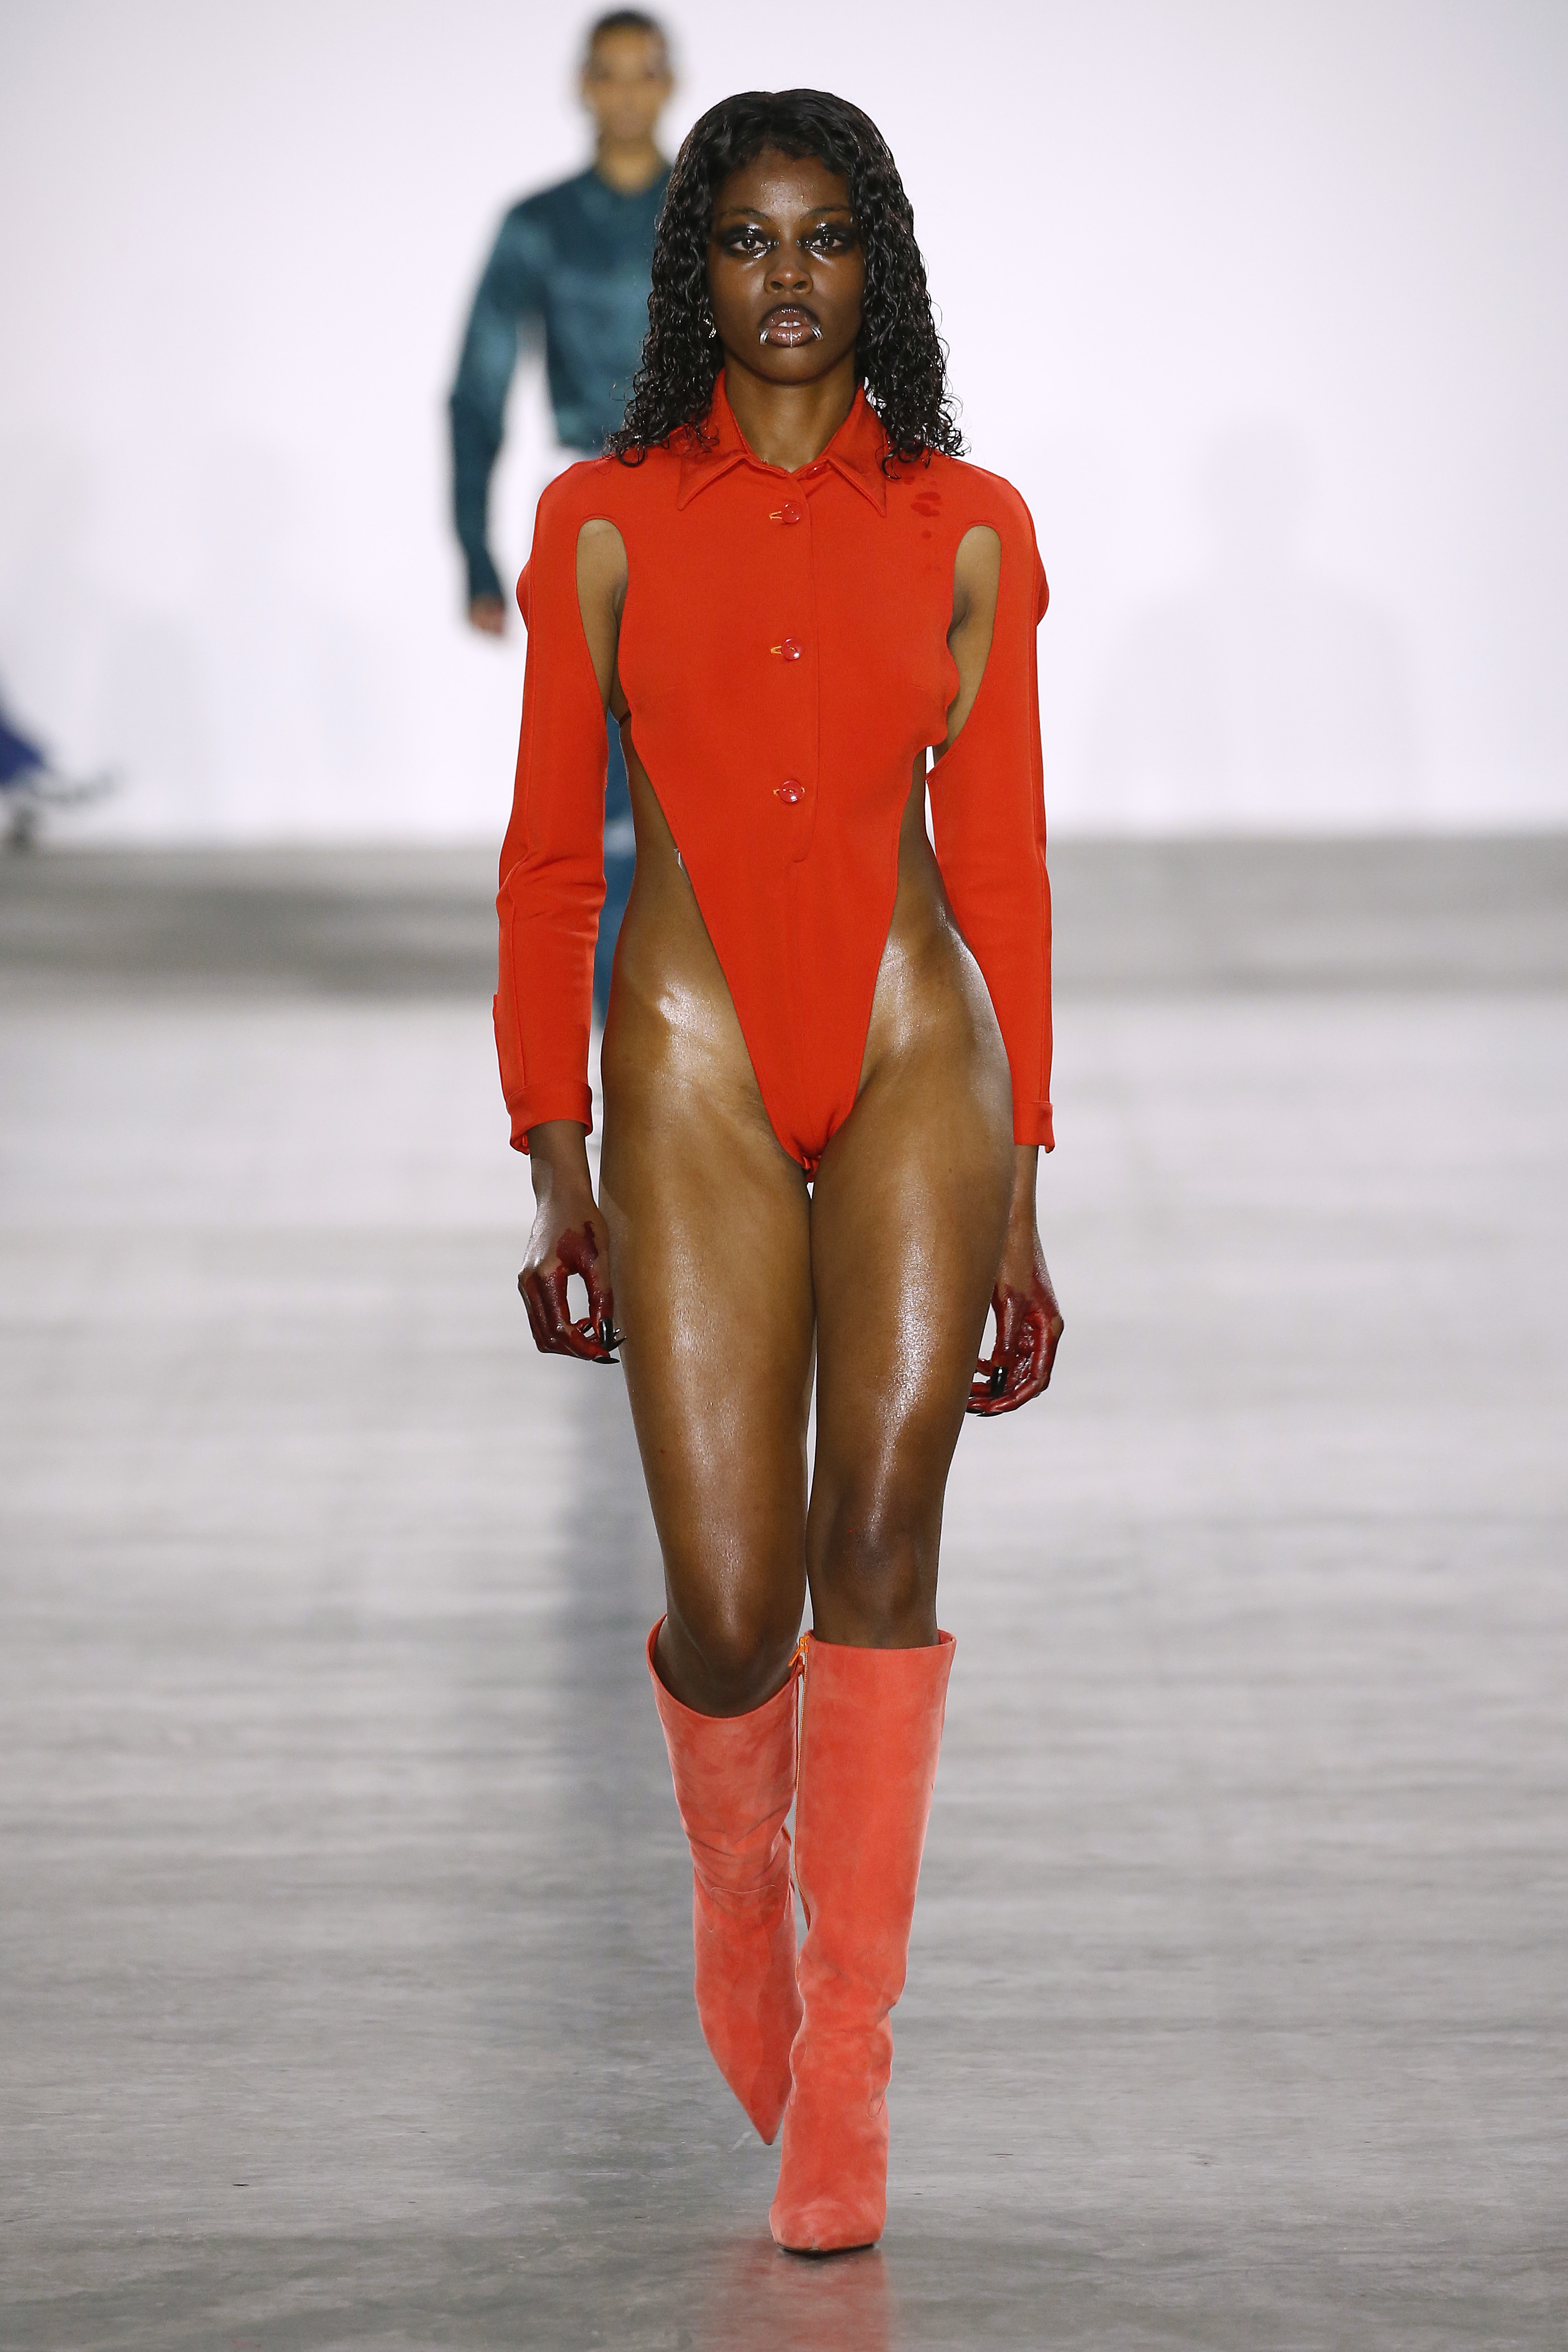 A model walks the runway in a high-cut red bodysuit and matching boots, another model in the background